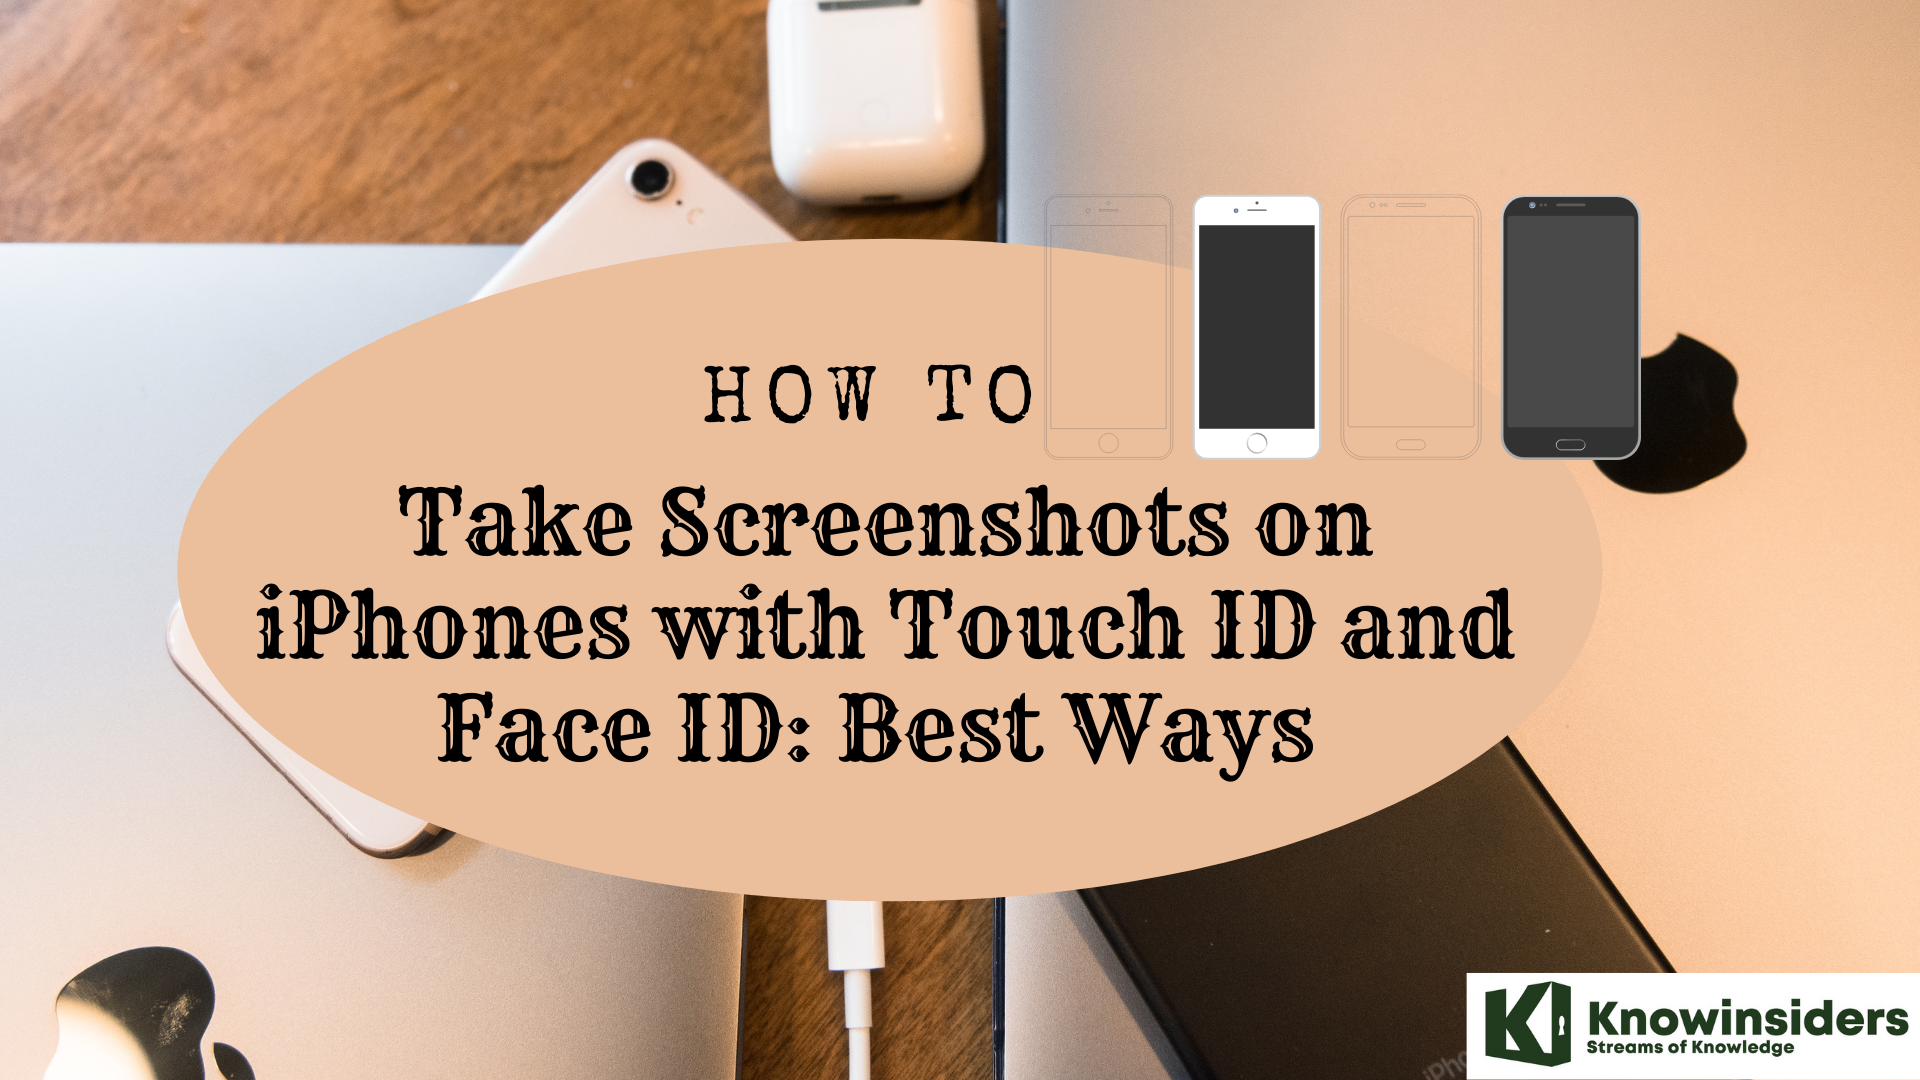 How To Take Screenshots on iPhones with Touch ID and Face ID